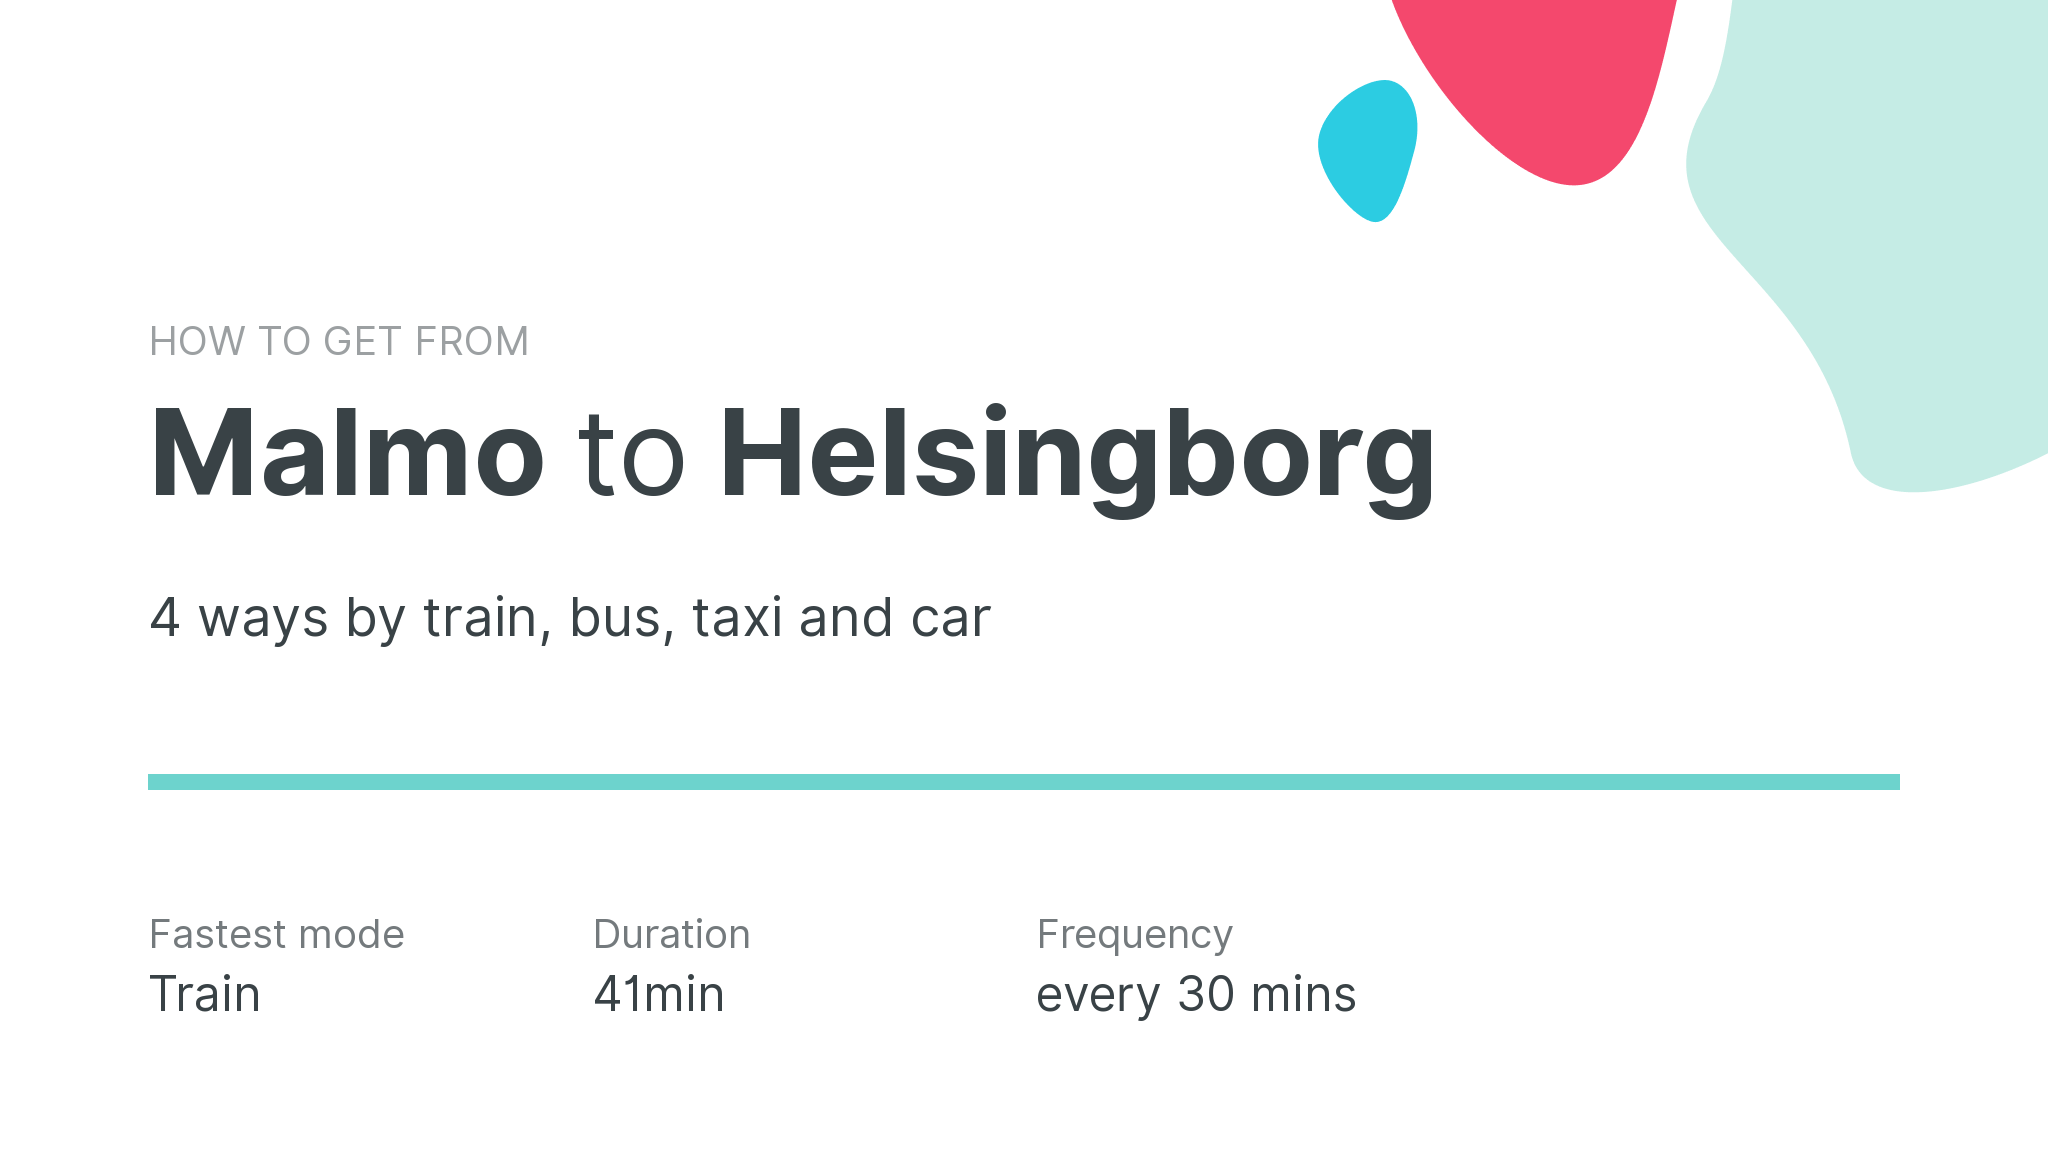 How do I get from Malmo to Helsingborg